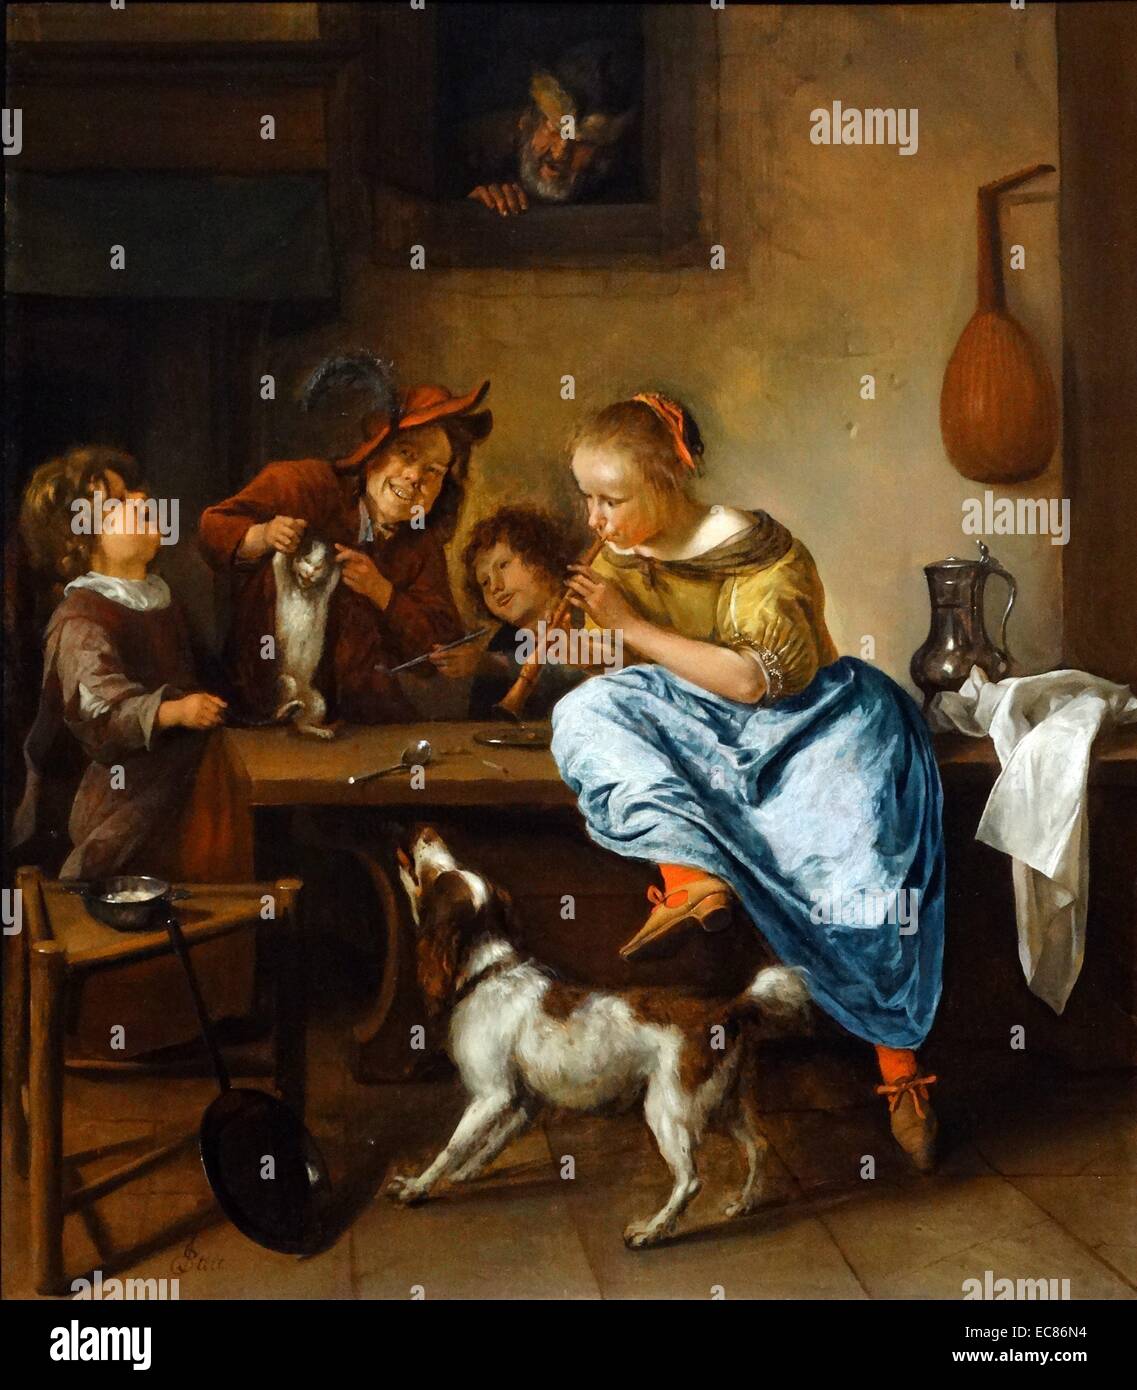 Painting titled 'The Dancing Lesson' depicts children teaching a cat to dance. Painted by Jan Havicksz Steen (1625-1679). Dated 17th Century Stock Photo